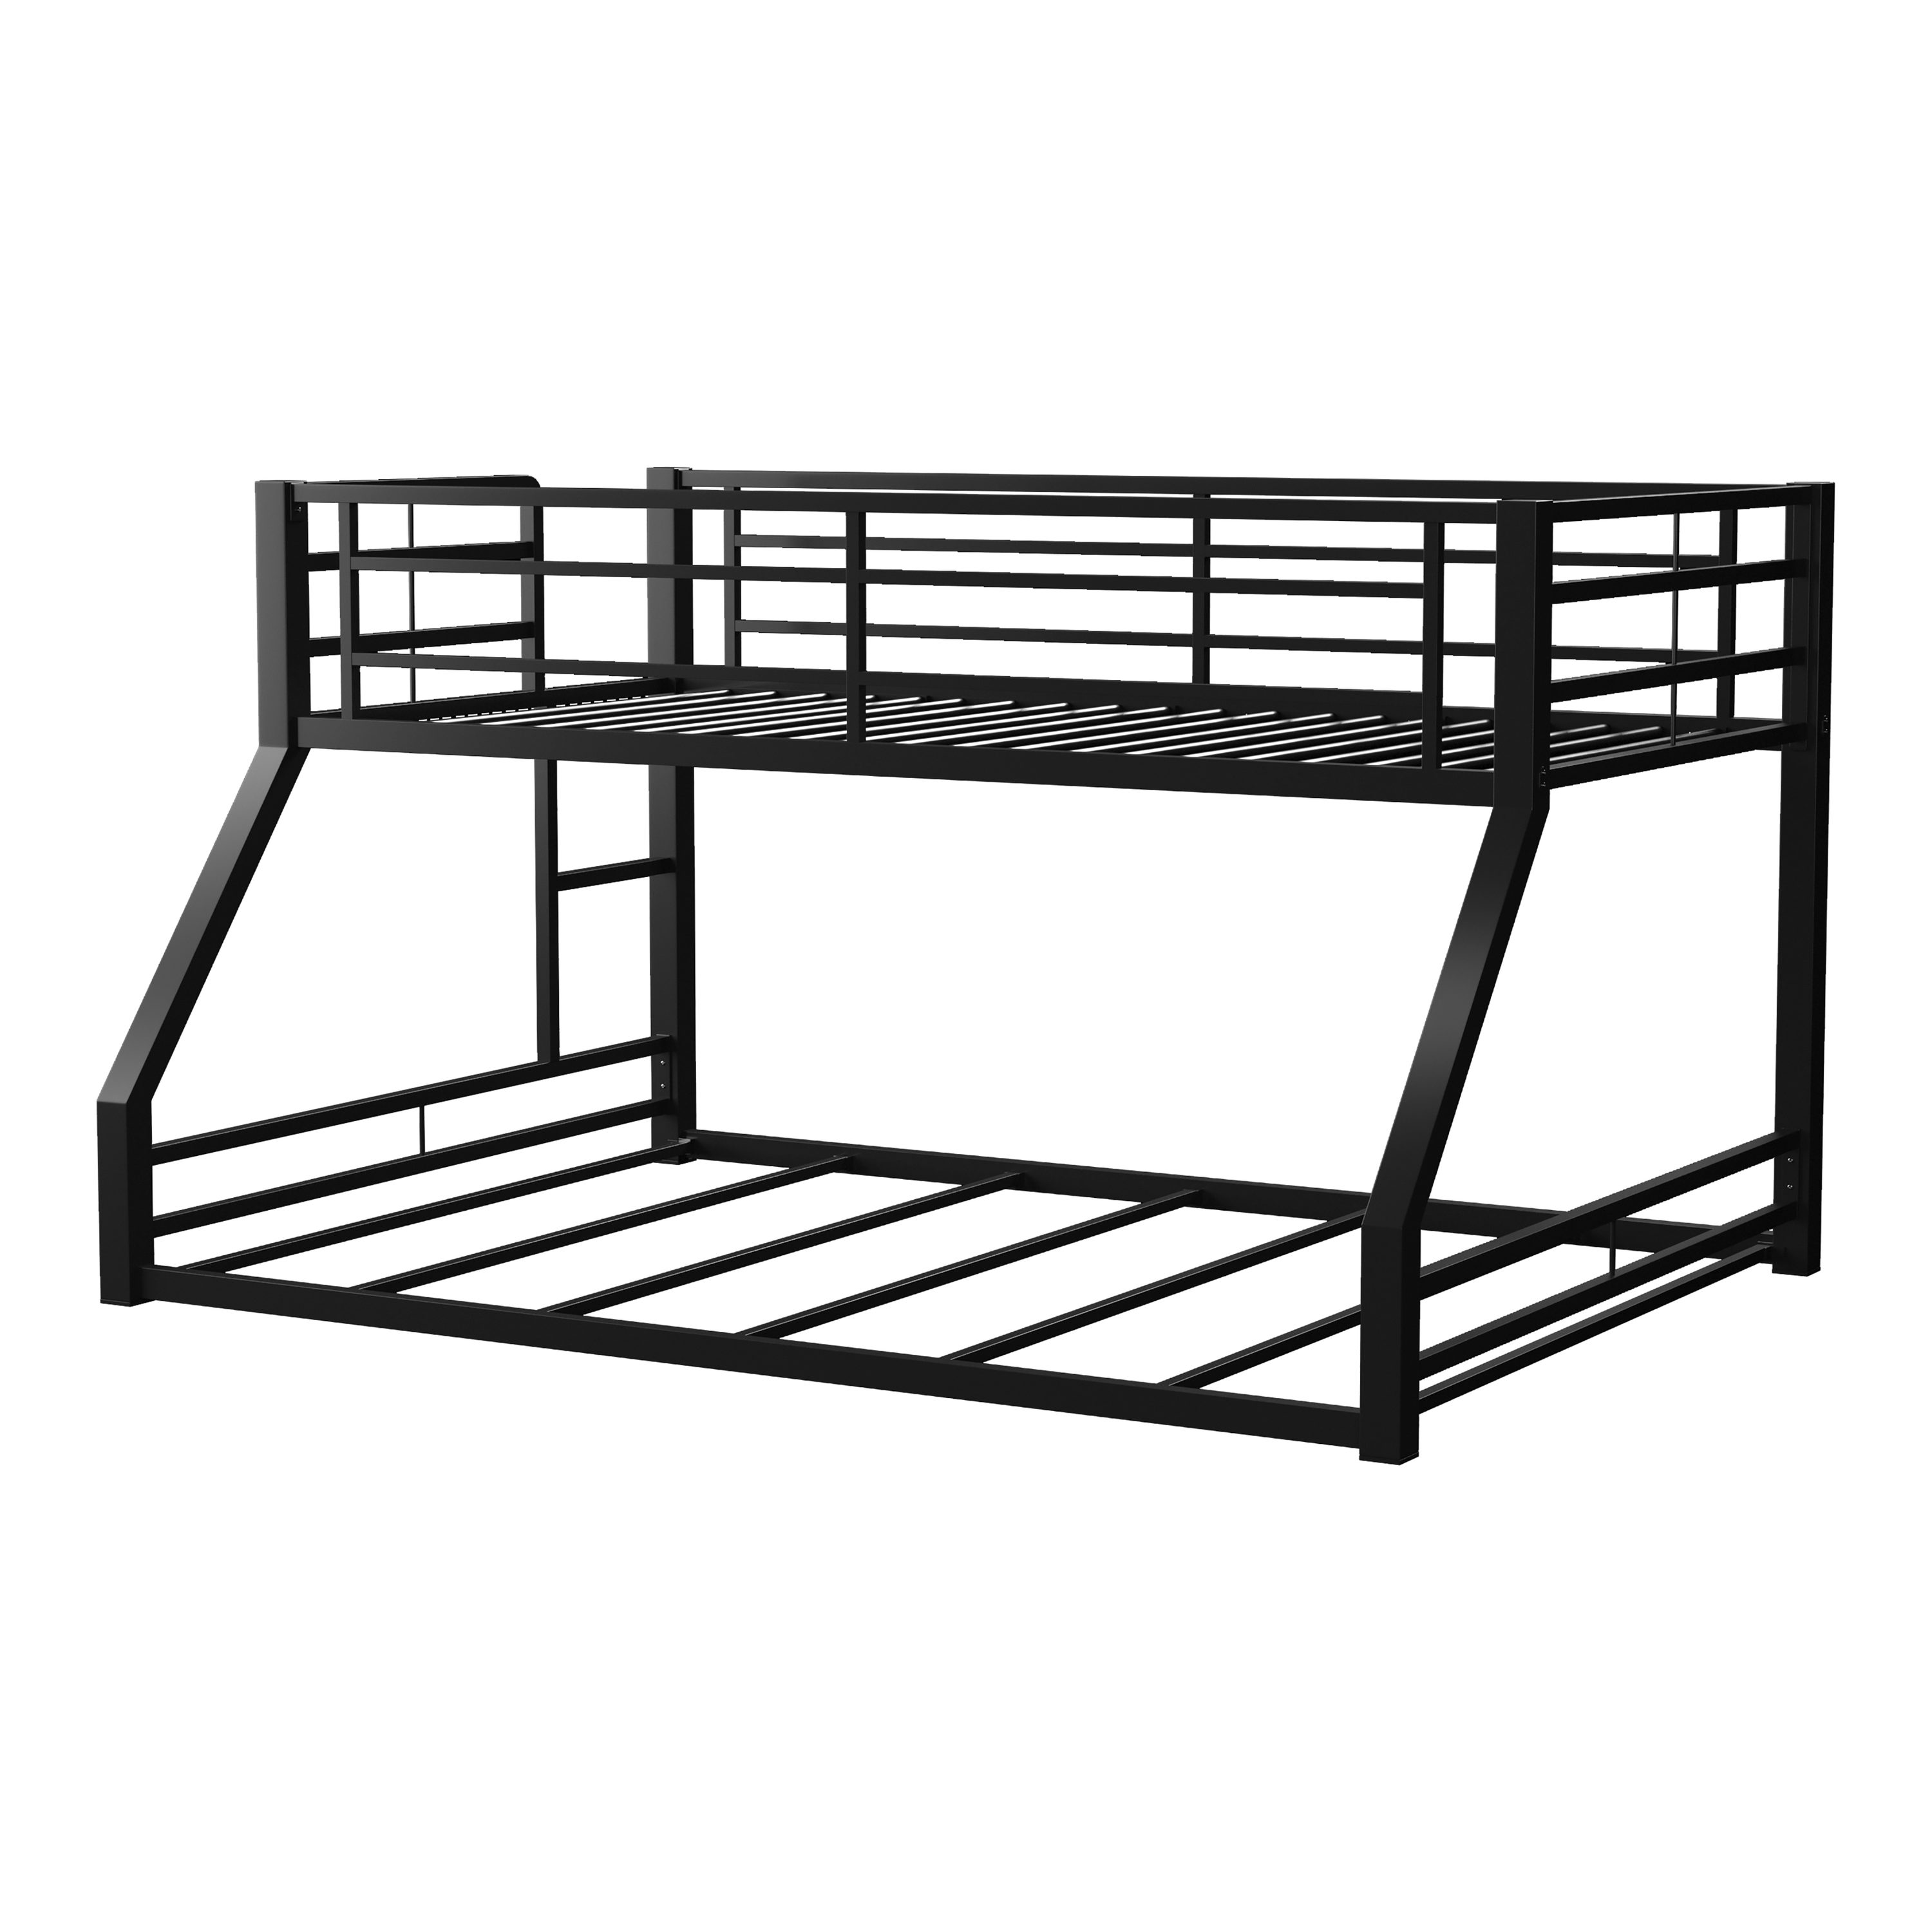 Full Bunk Bed In The Beds, Furniture Of America Bunk Bed